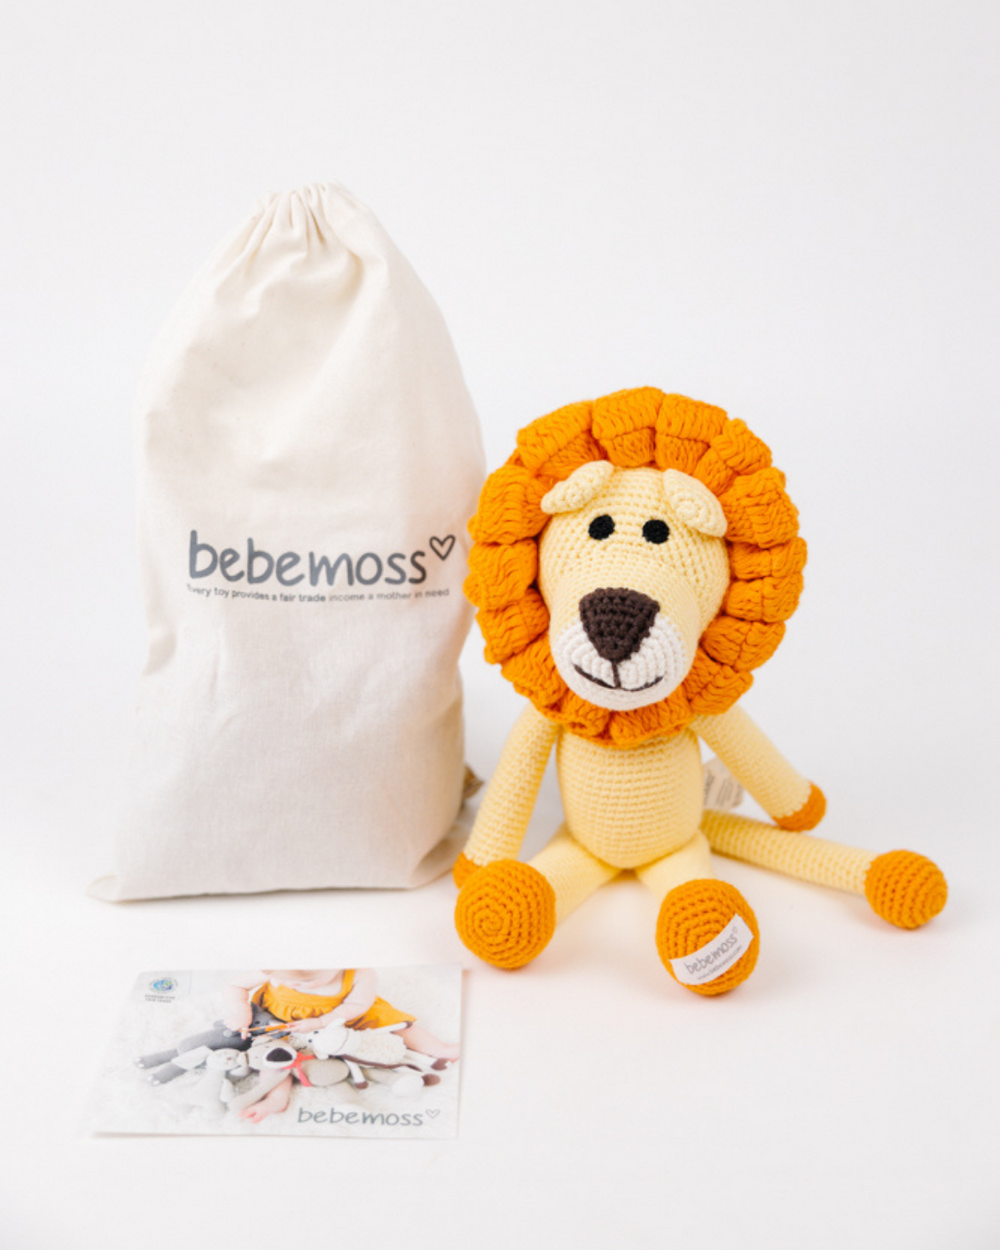 Leo the lion - a hand-knitted ornamental product